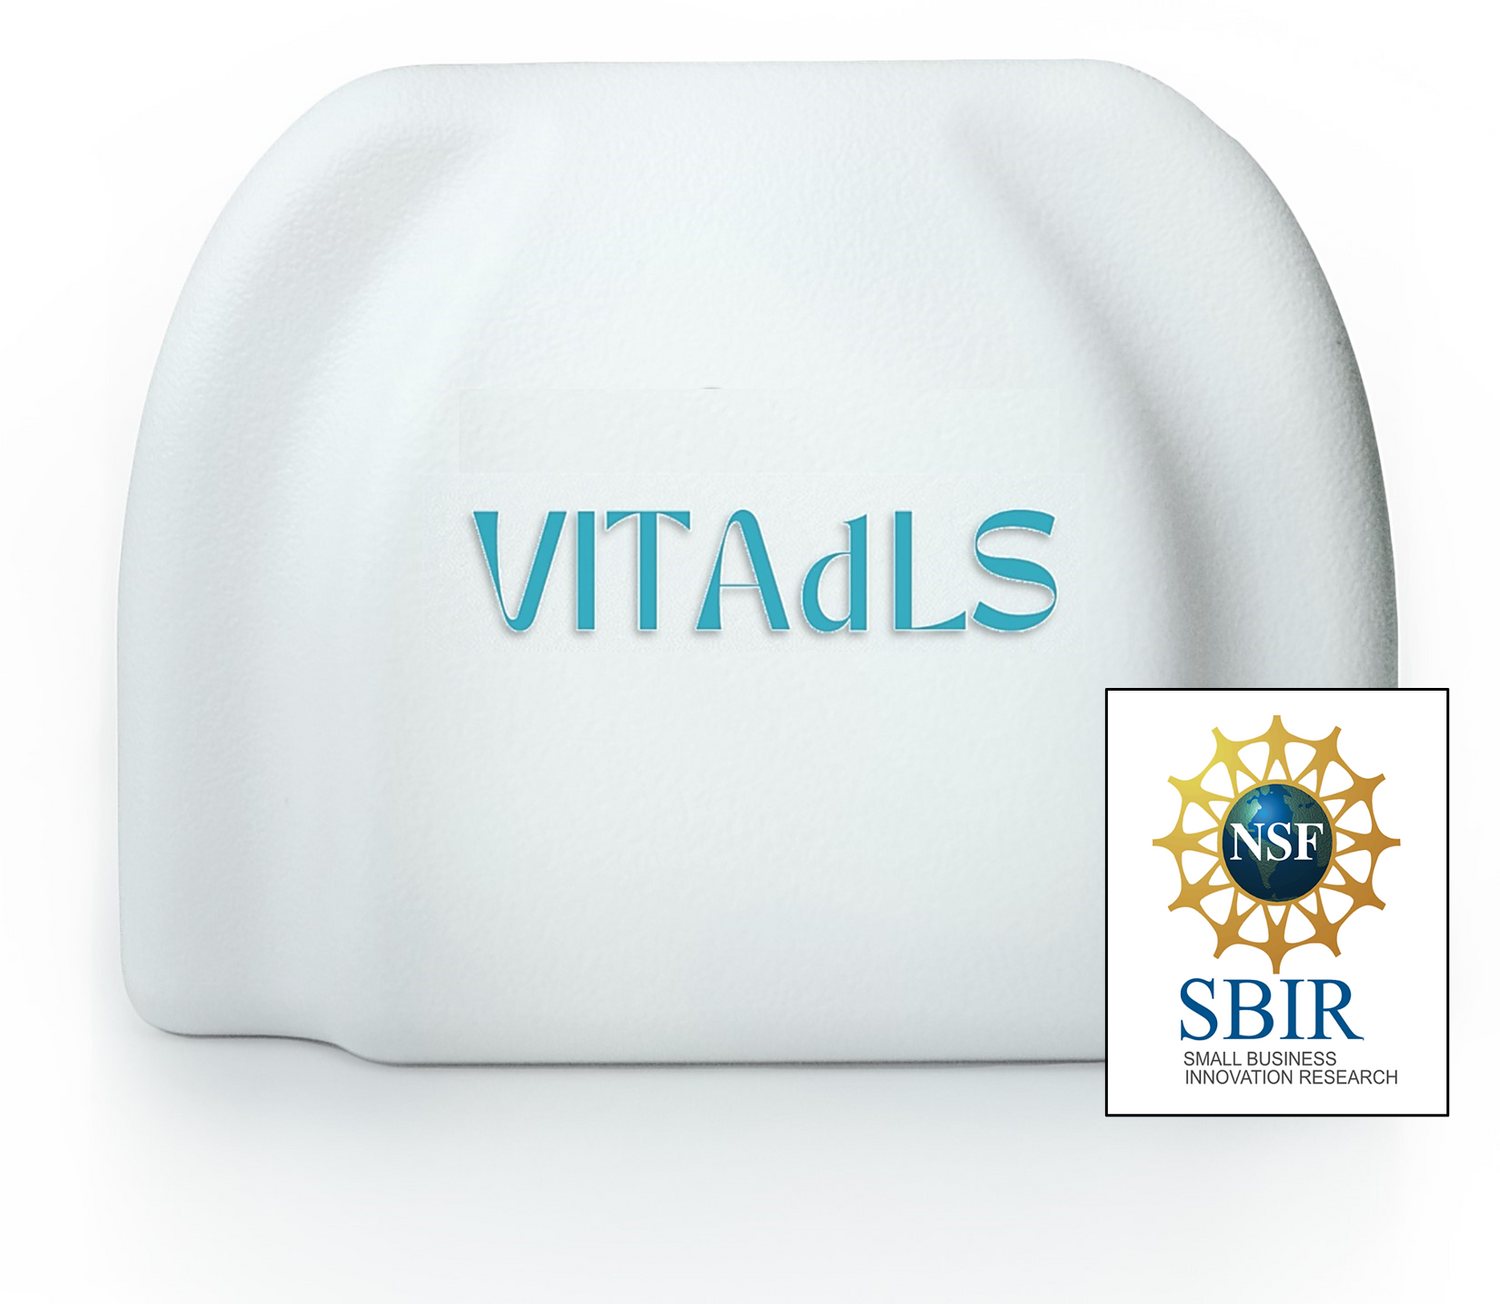 White, rectangular device with the brand name "VITAdLS" on the front and the logo of the National Science Foundation: Small Business Innovation Research logo overlaid in the bottom righthand corner of the image. 